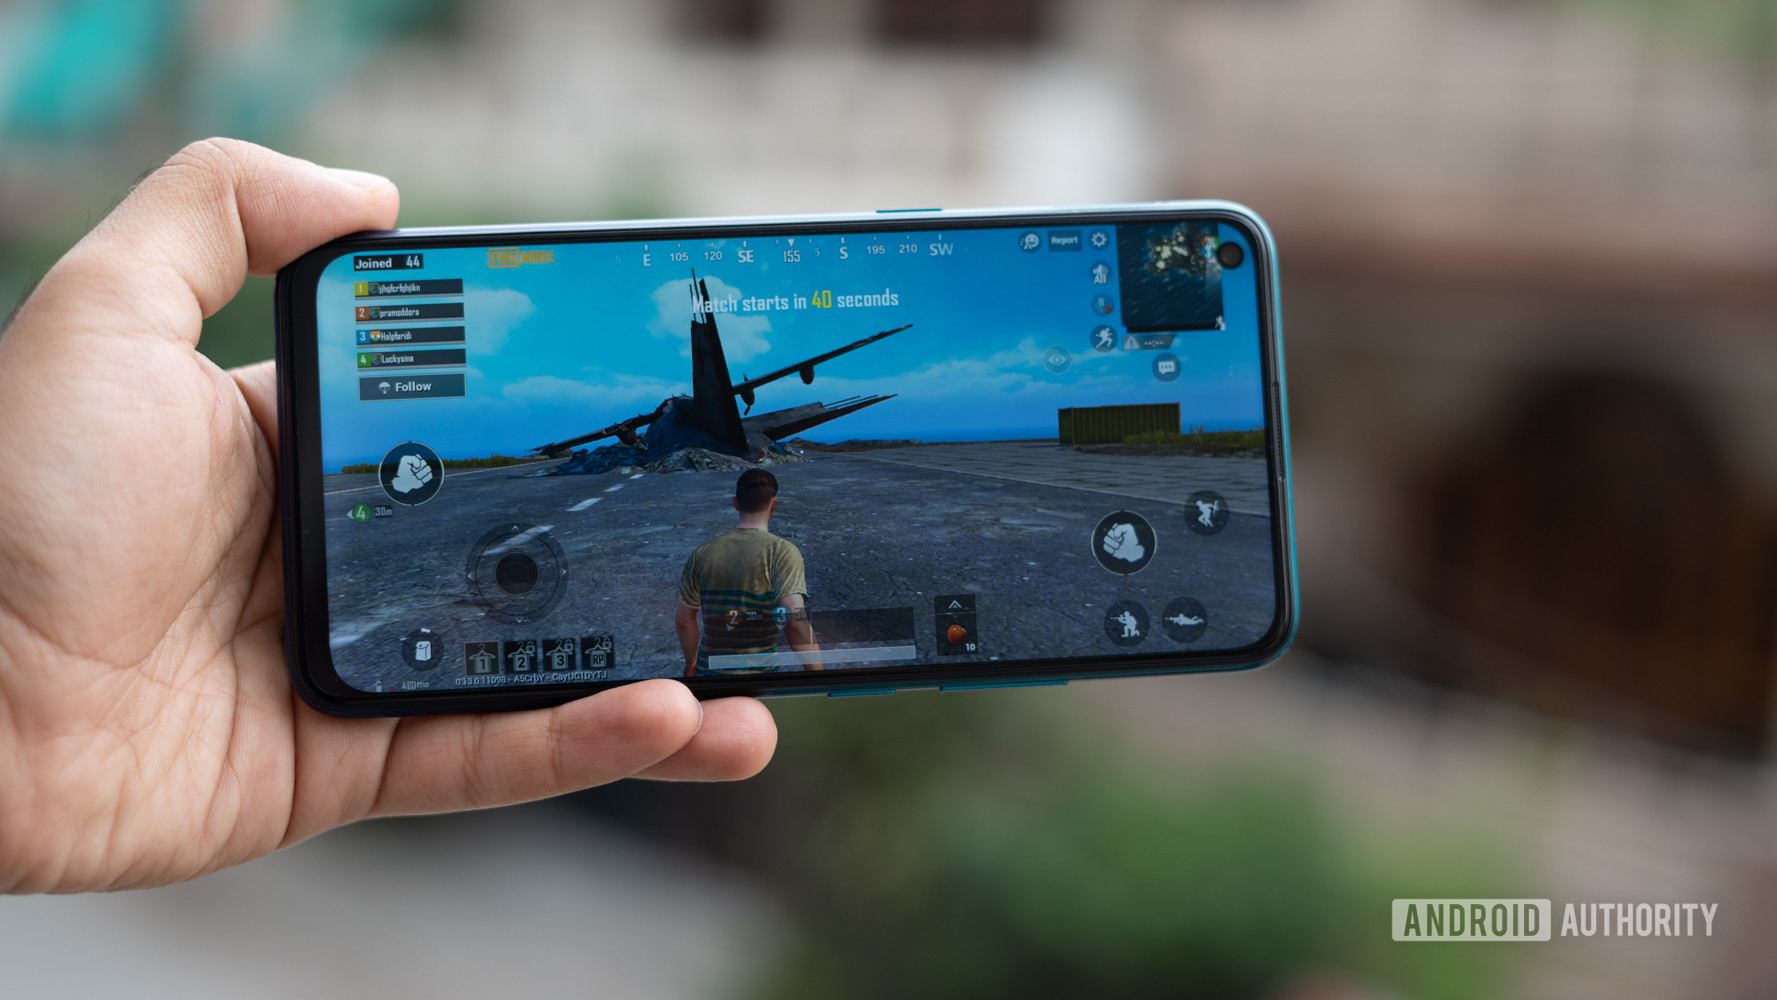 vivo Z1 Pro with PUBG running on it - PUBG Mobile controller support